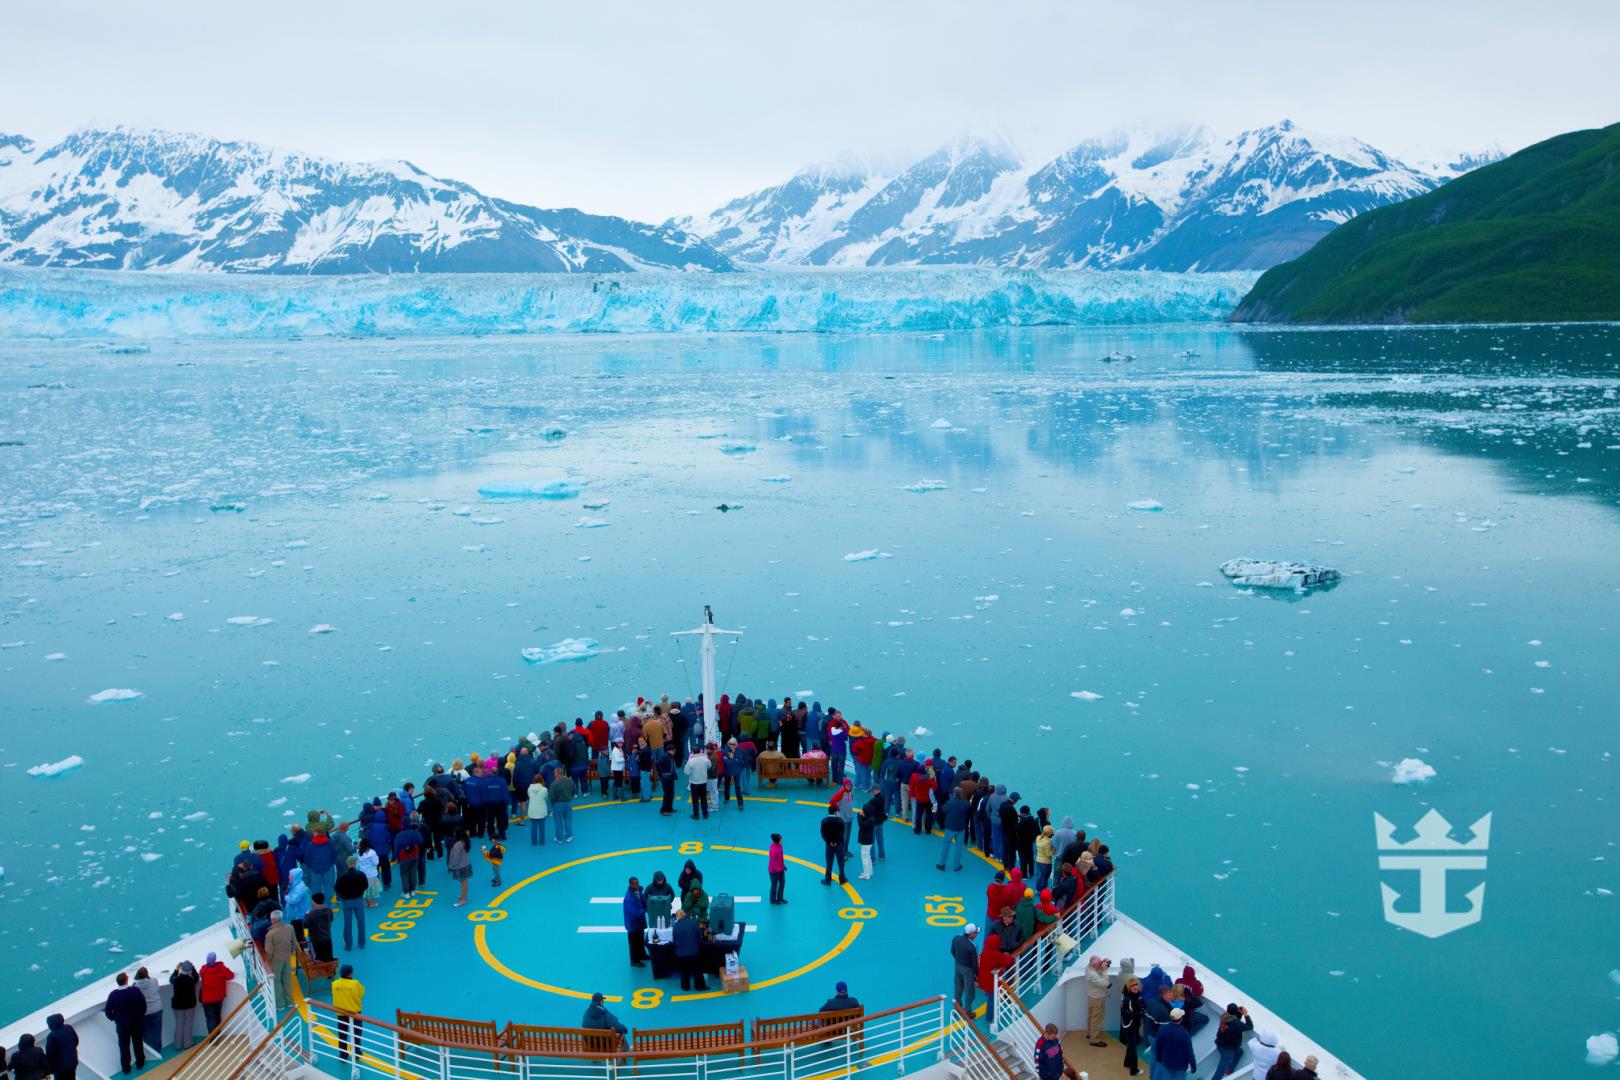 View of passengers observing the Hubbard Glacier in Alaska from the top deck